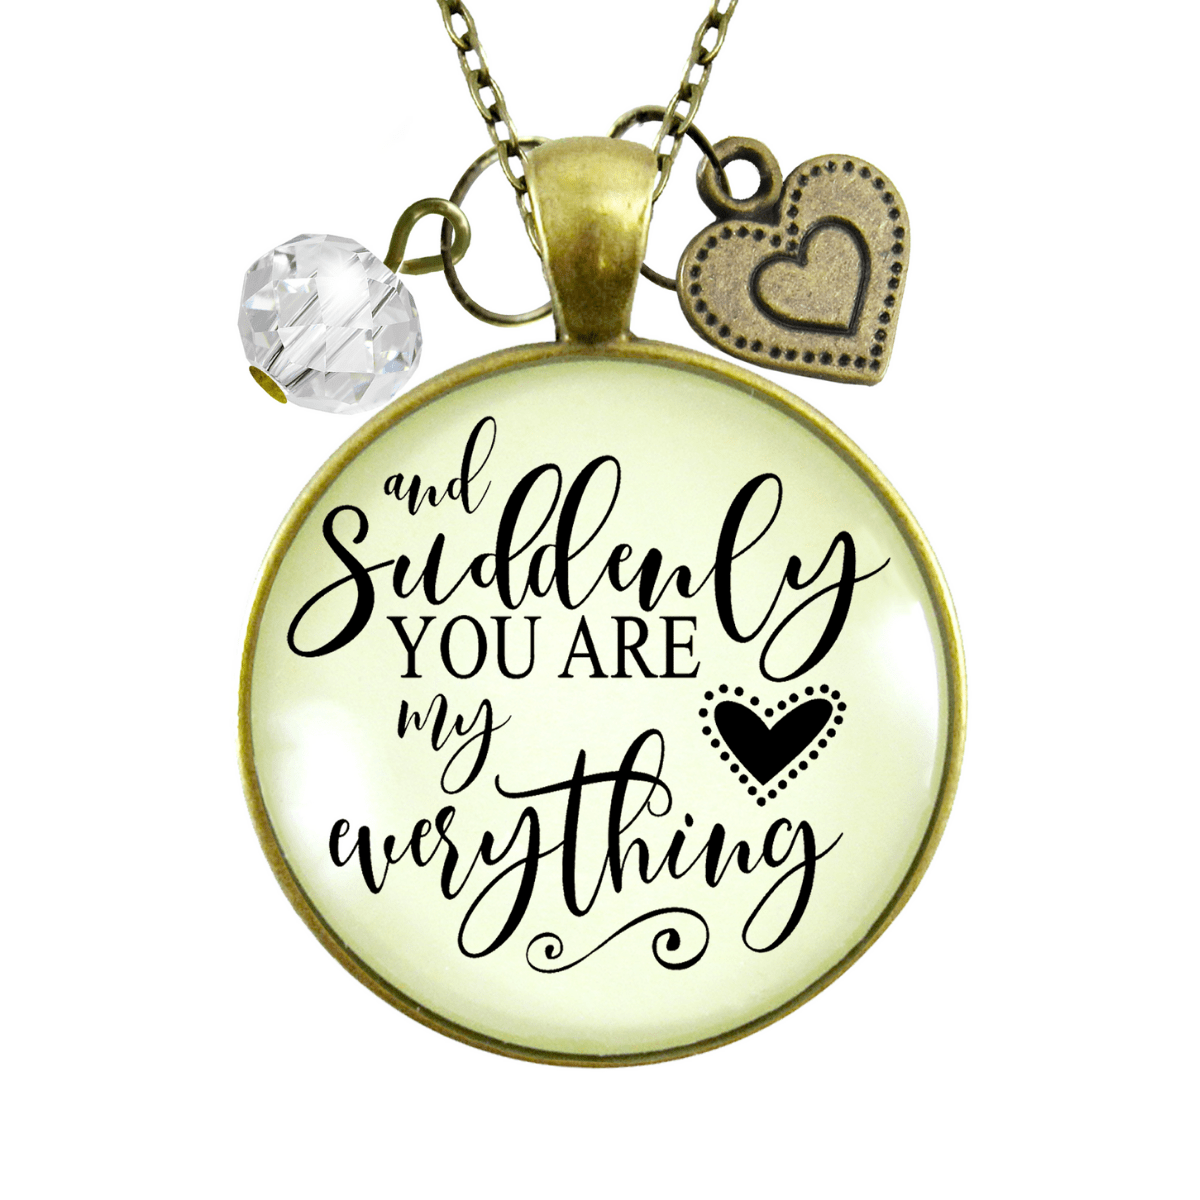 Gutsy Goodness First Mothers Day Necklace Suddenly You are My Everything Mom Jewelry - Gutsy Goodness;First Mothers Day Necklace Suddenly You Are My Everything Mom Jewelry - Gutsy Goodness Handmade Jewelry Gifts